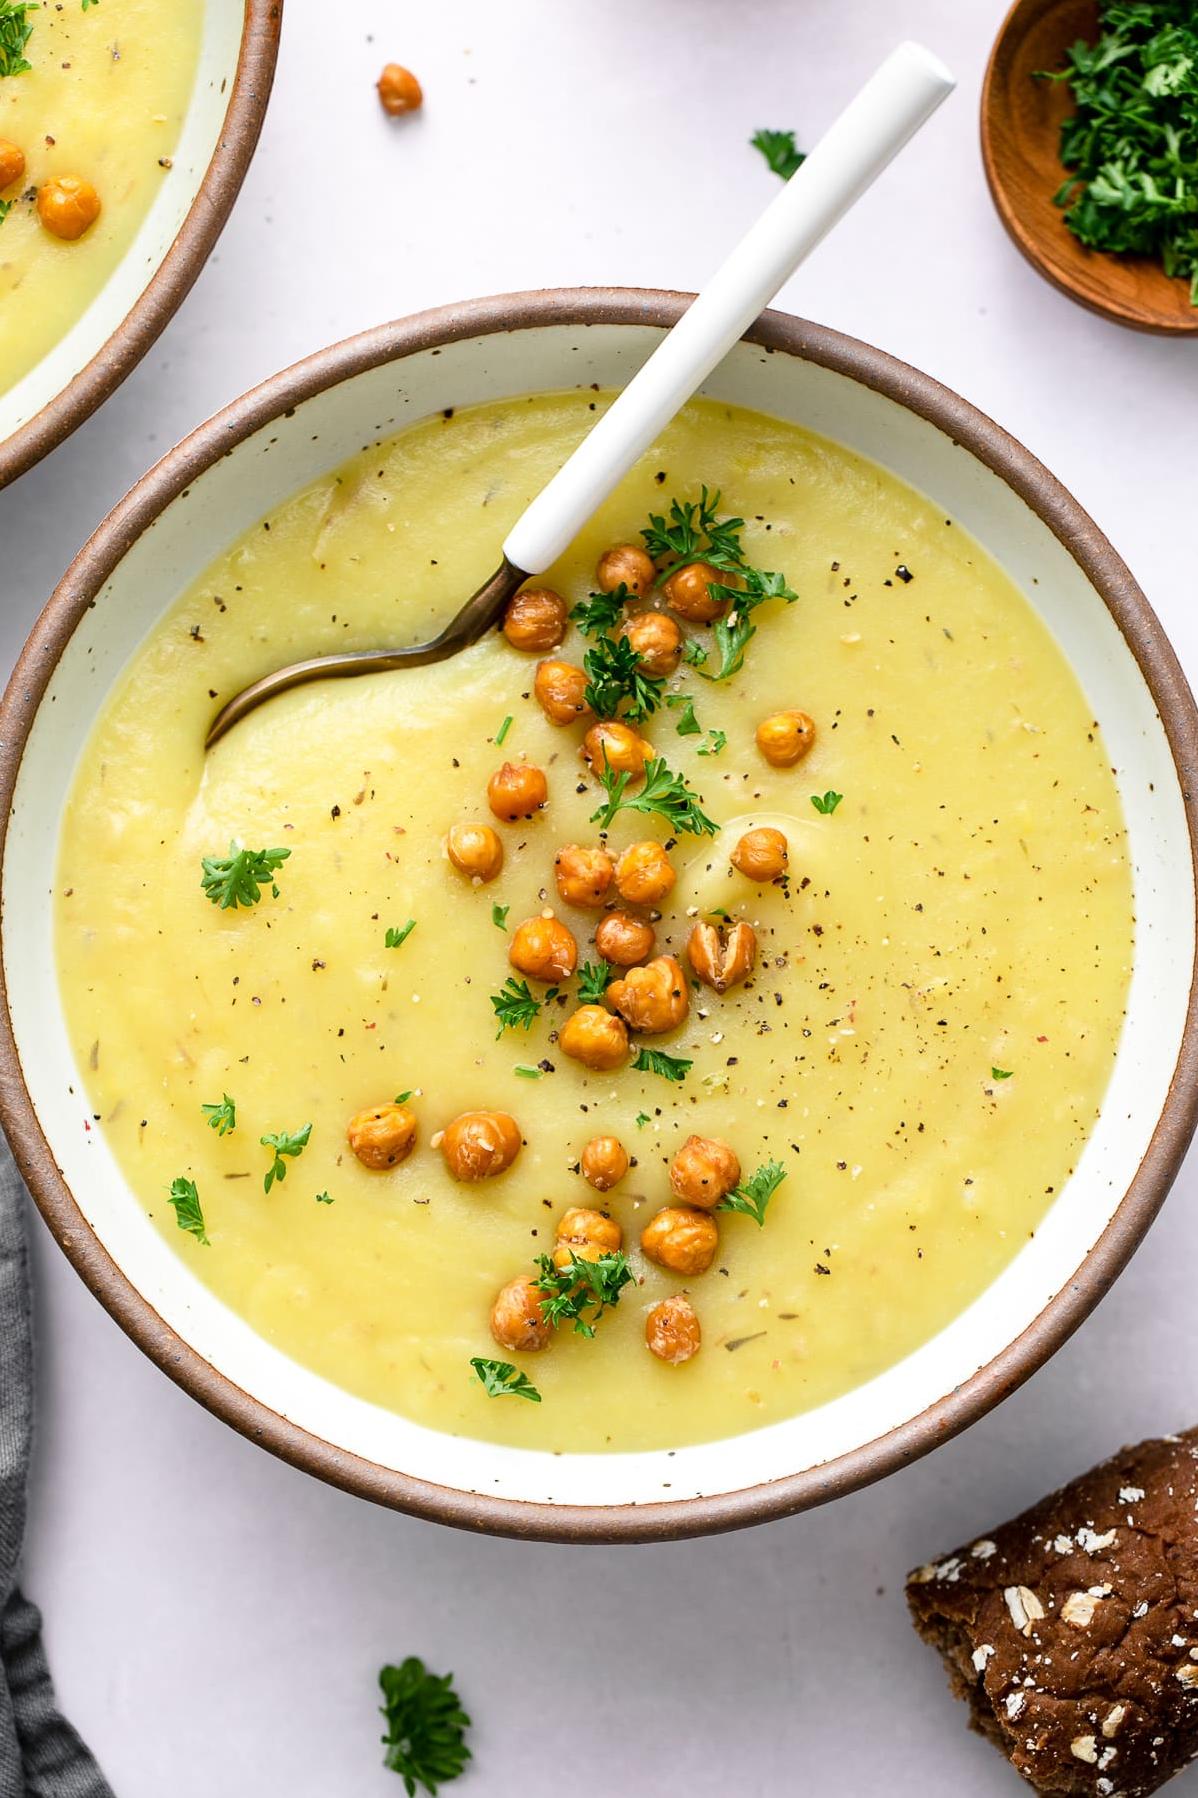  A vegan take on a classic, this soup is sure to satisfy and impress